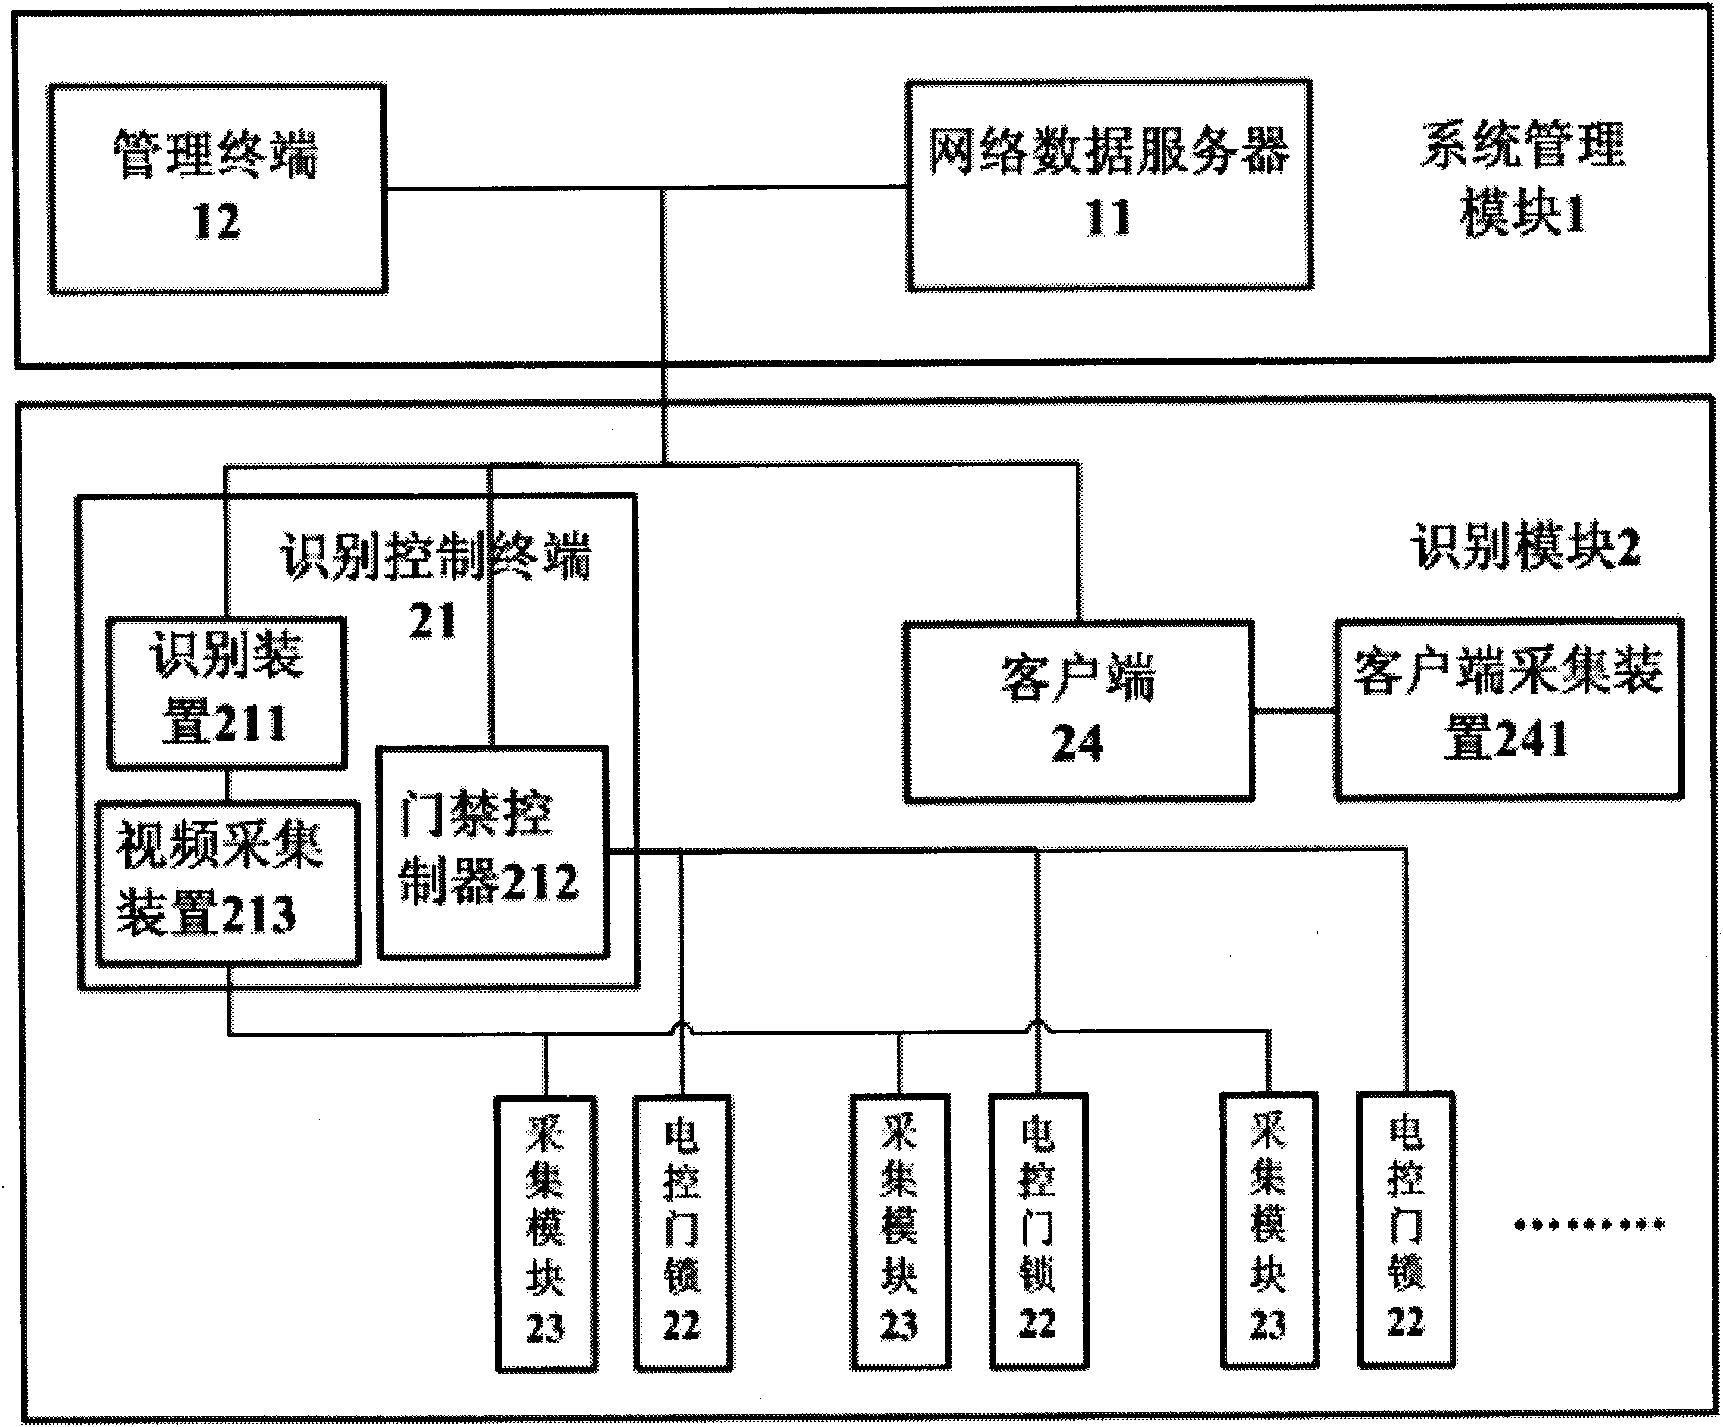 Network human face recognition system with intelligent management system and recognition method thereof